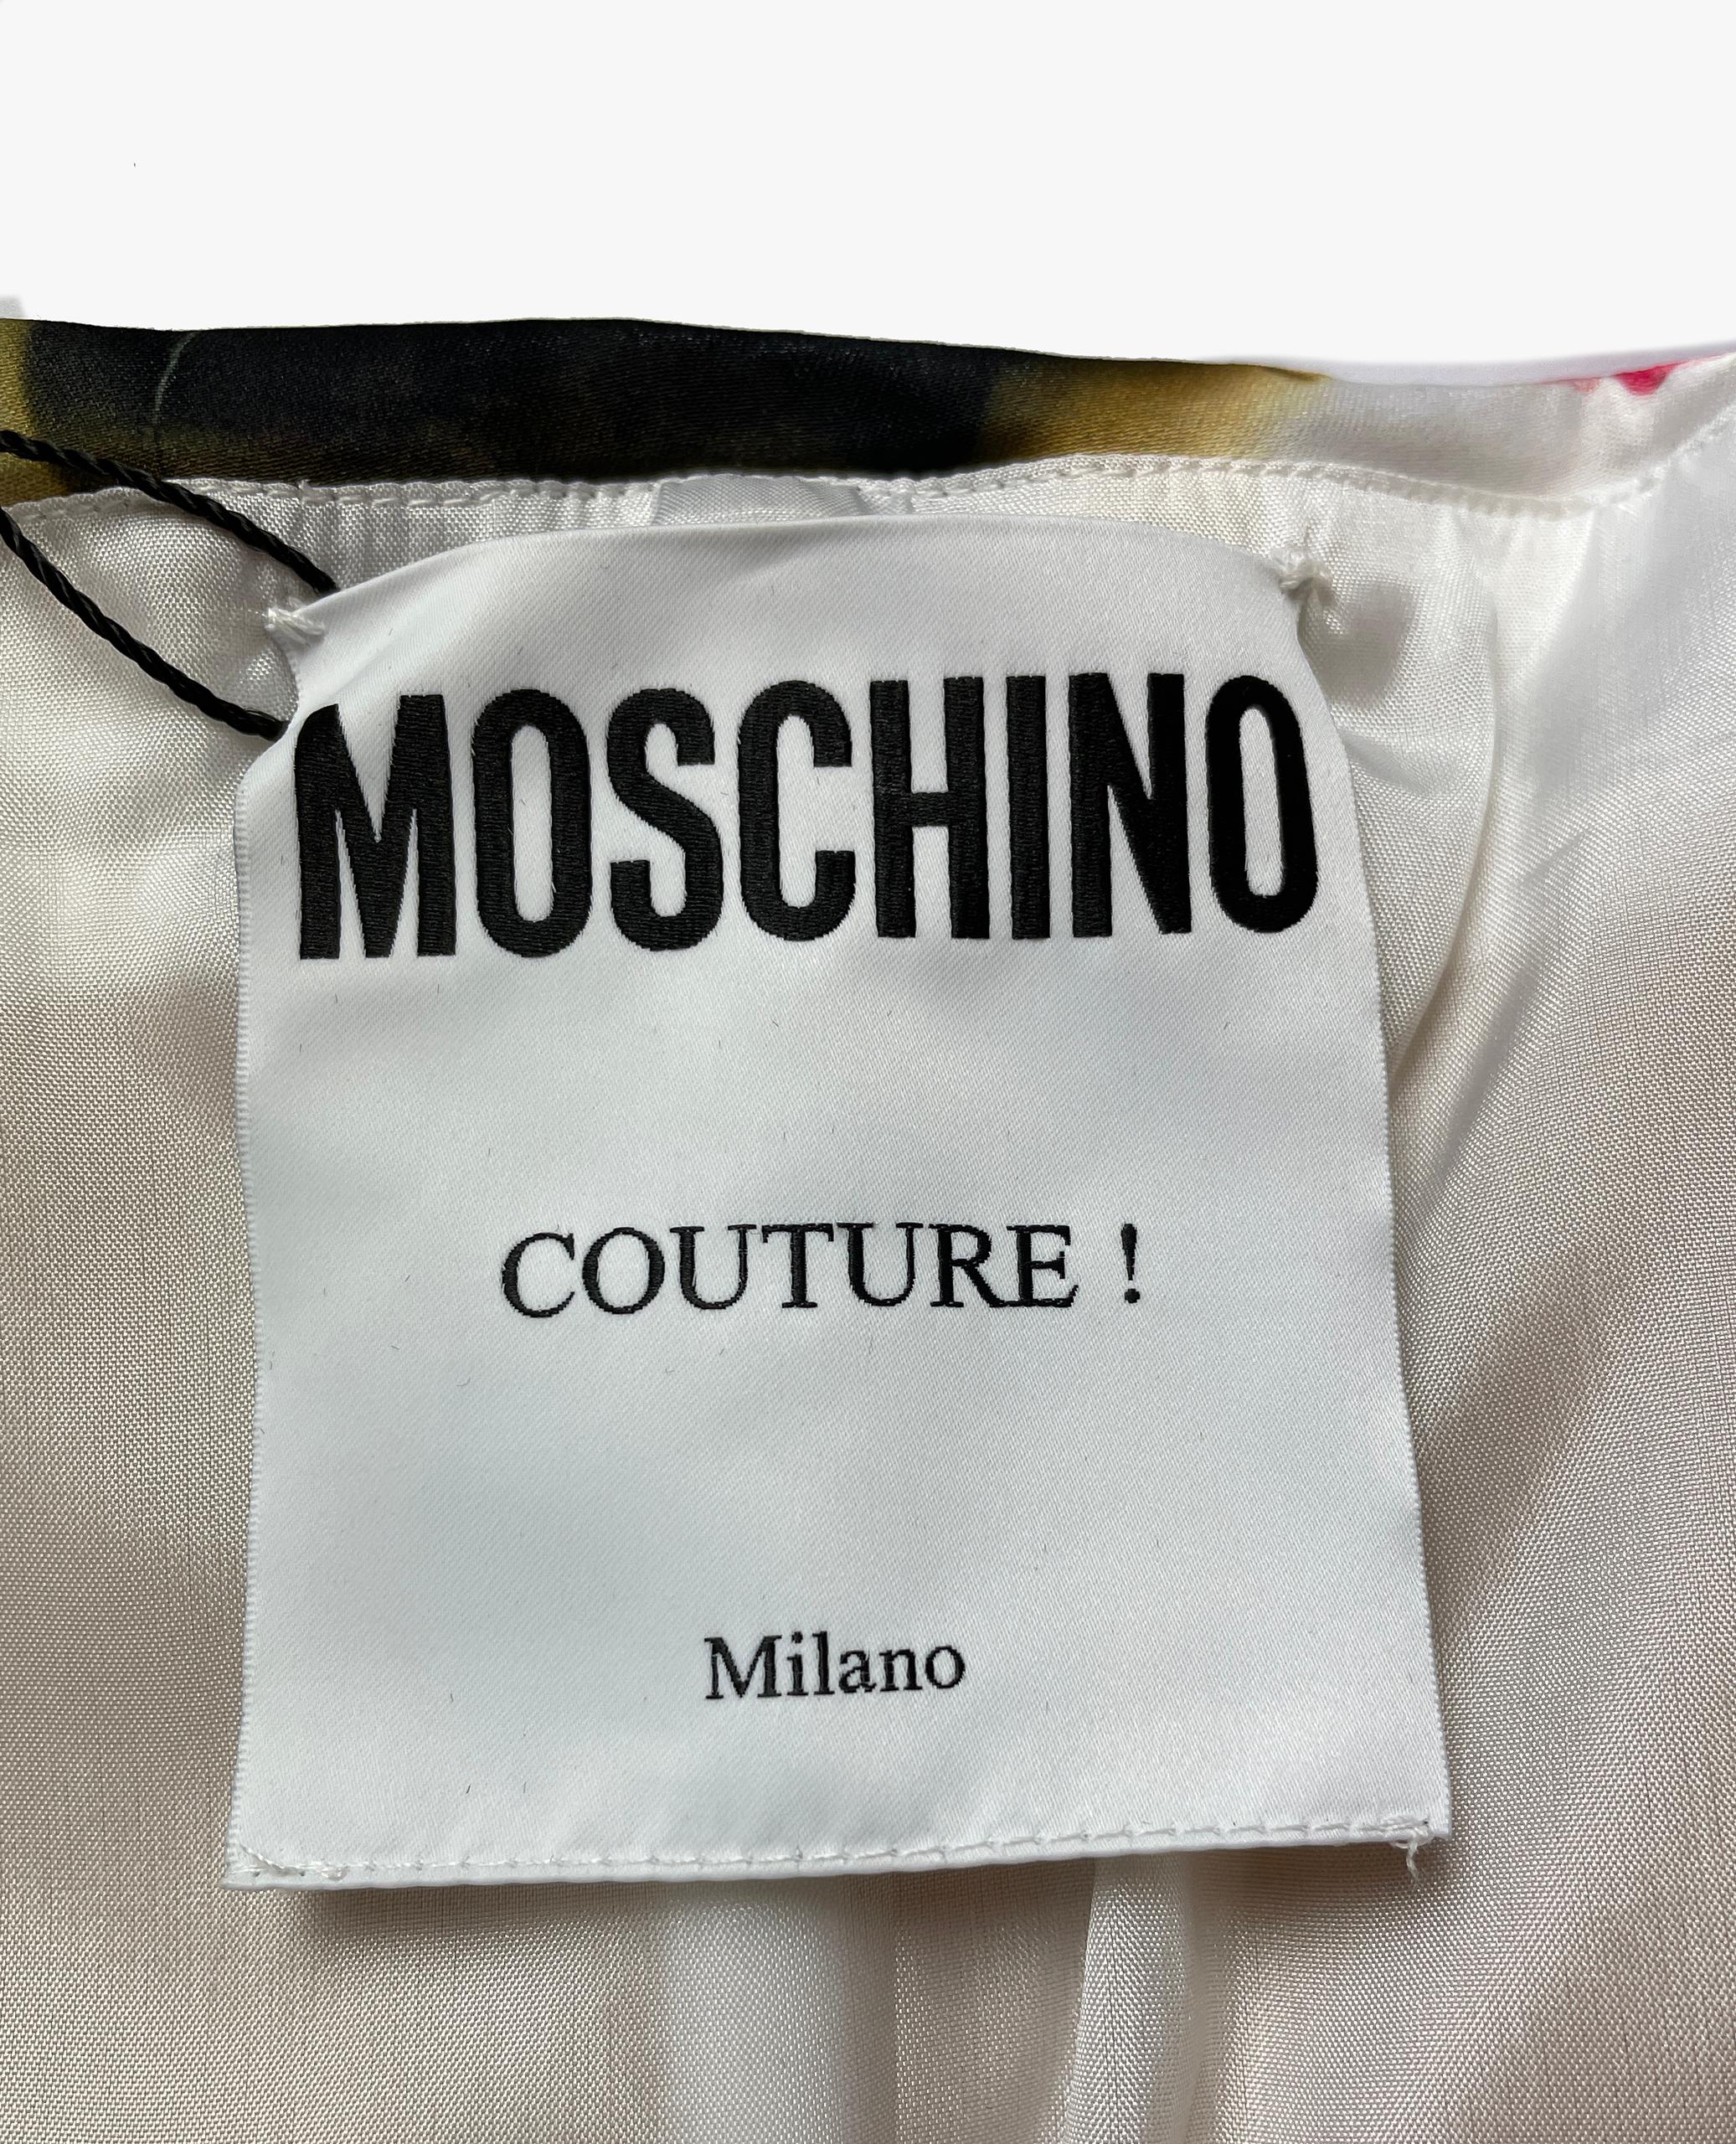 Moschino Couture Floral Print Dress, 2000s For Sale 3